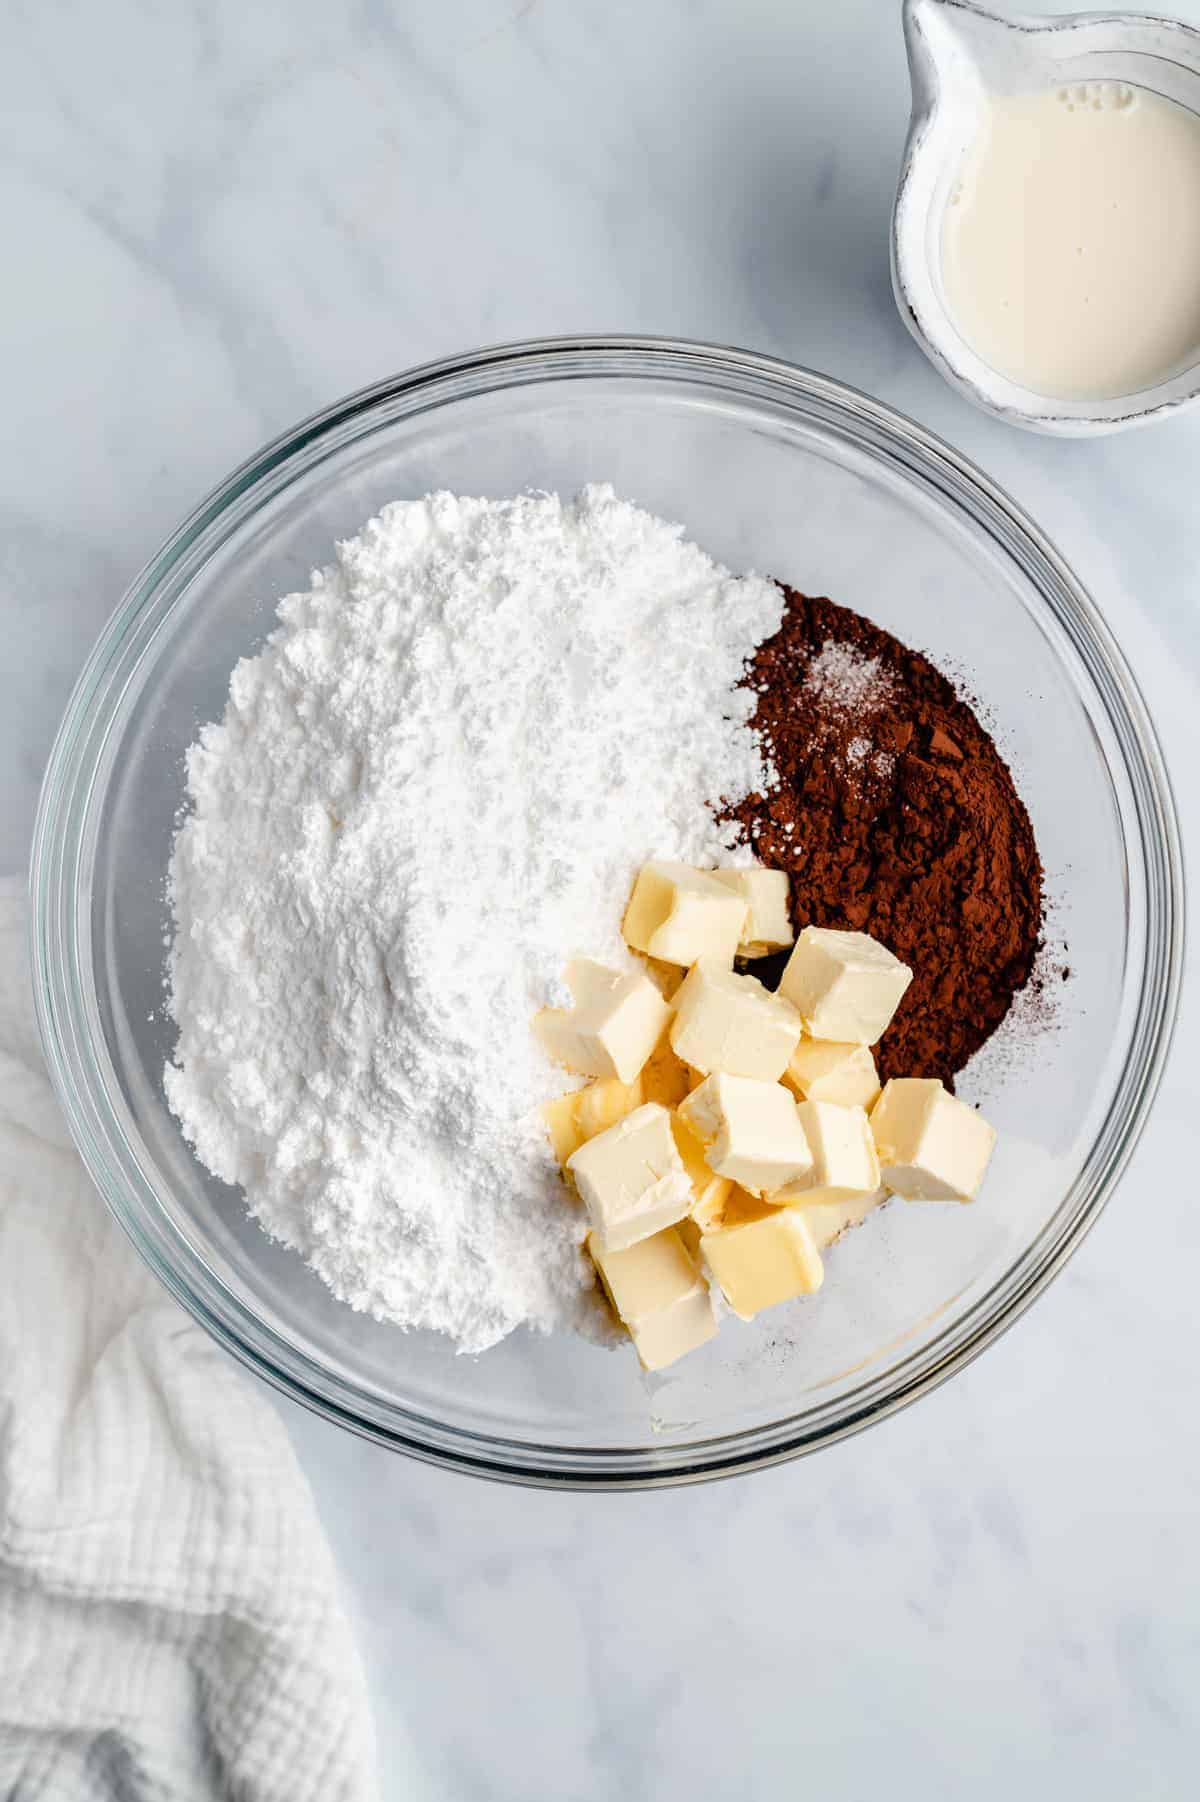 Powdered sugar, butter, and cocoa powder in a glass mixing bowl